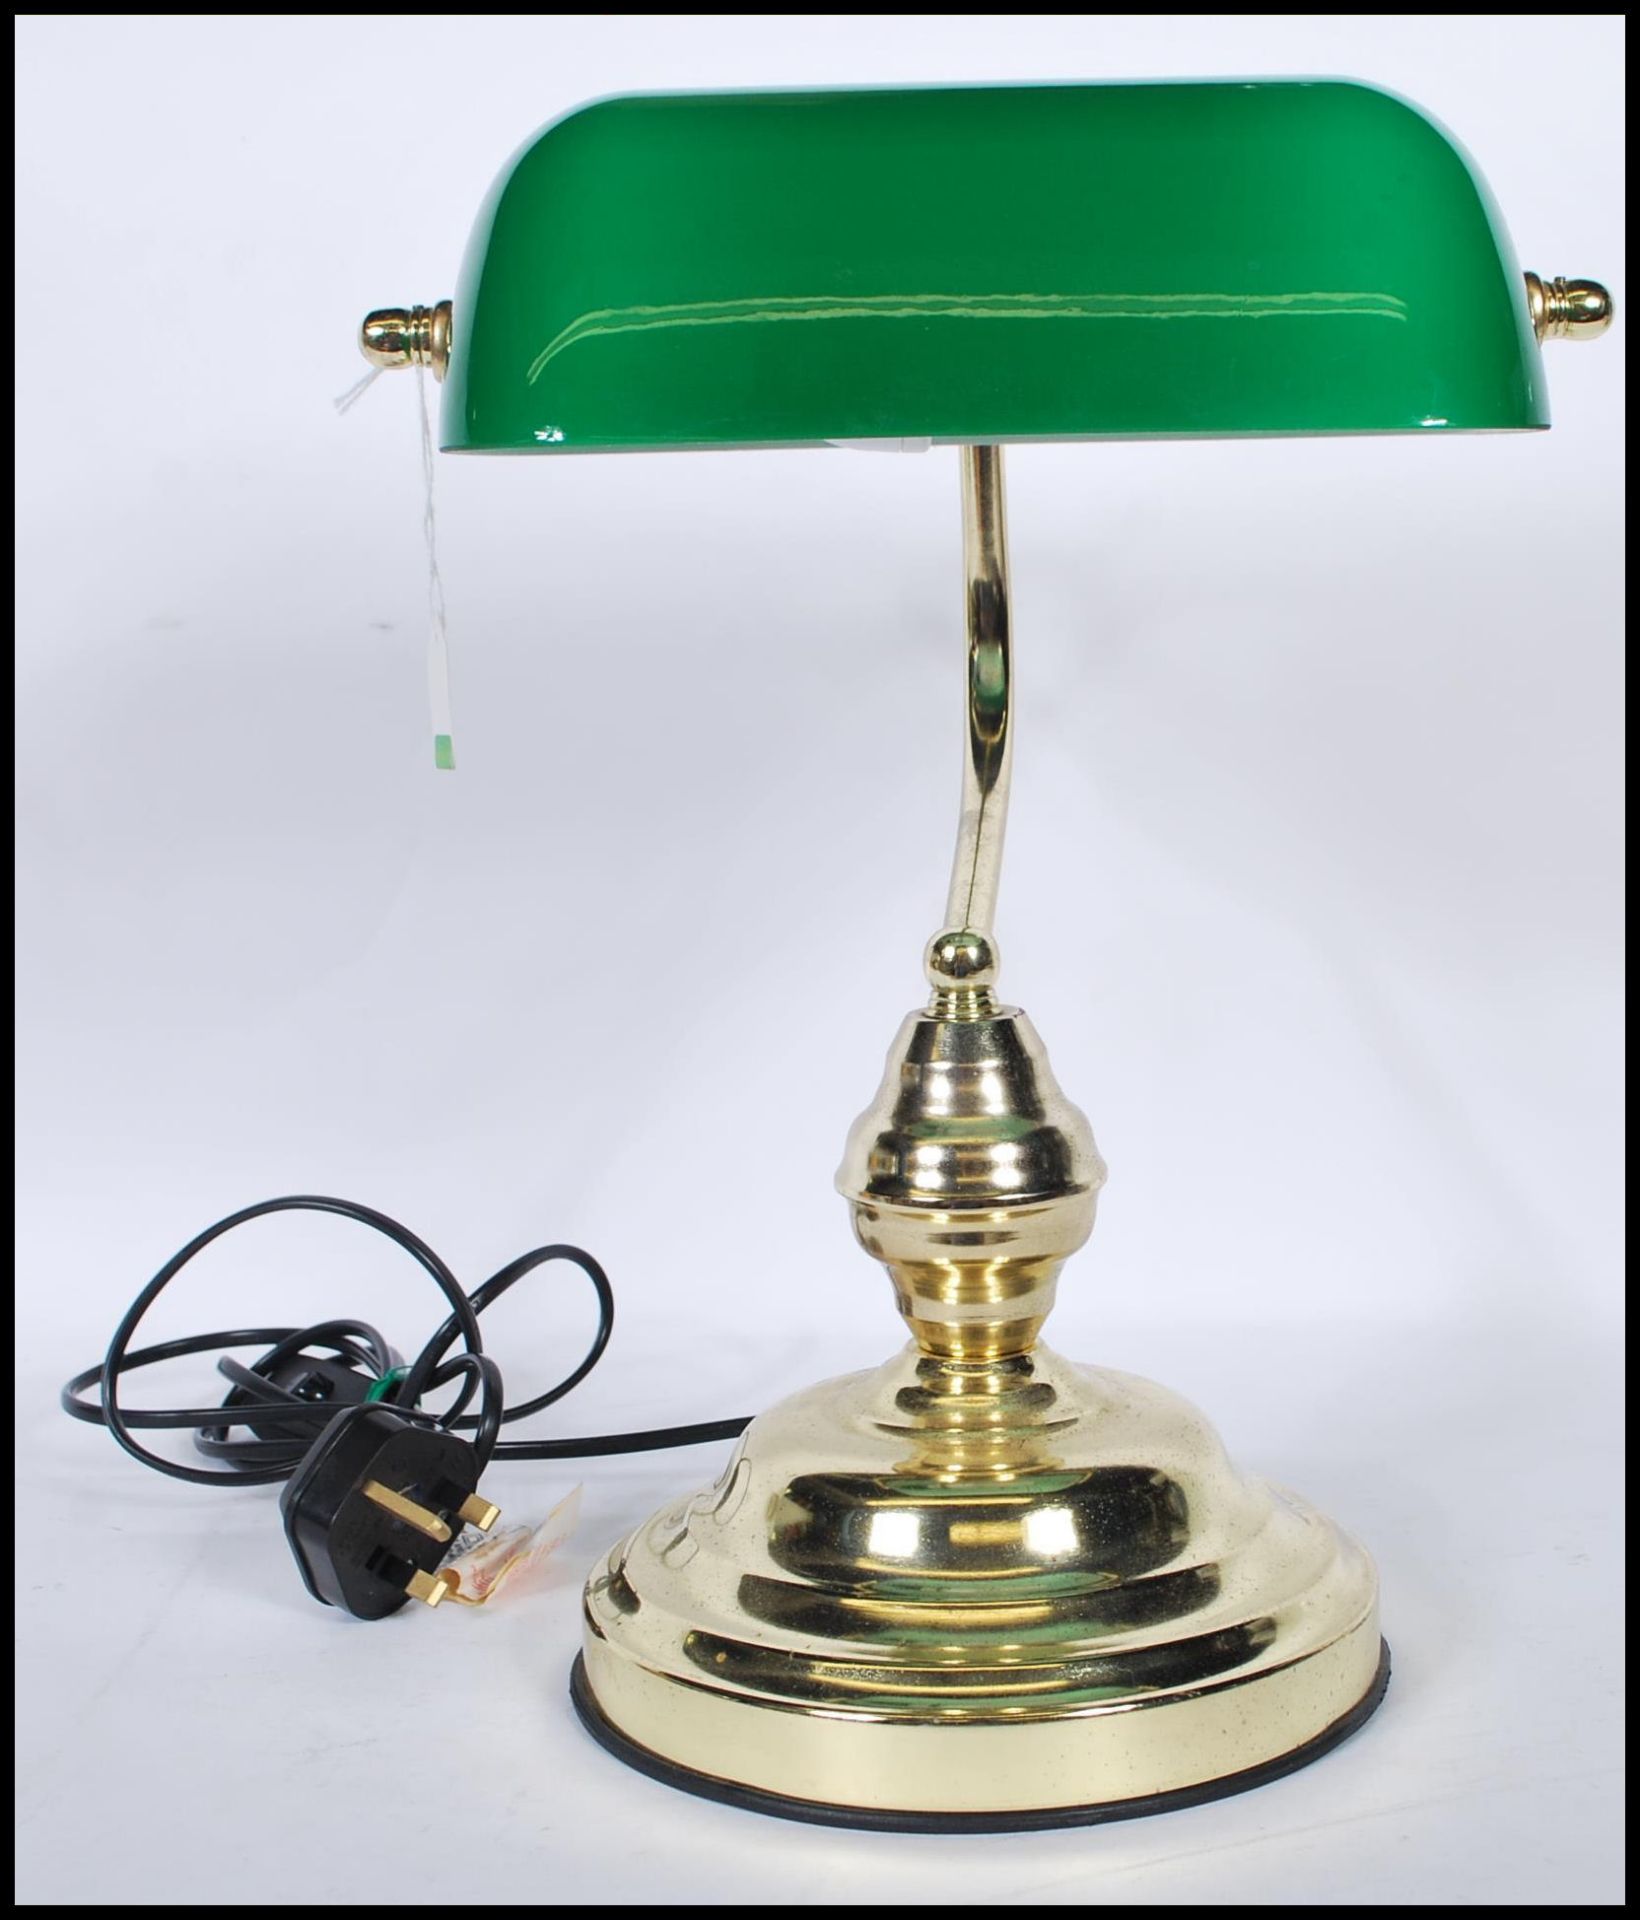 A vintage style bankers desk lamp having an adjustable green glass shade raised on a brass support